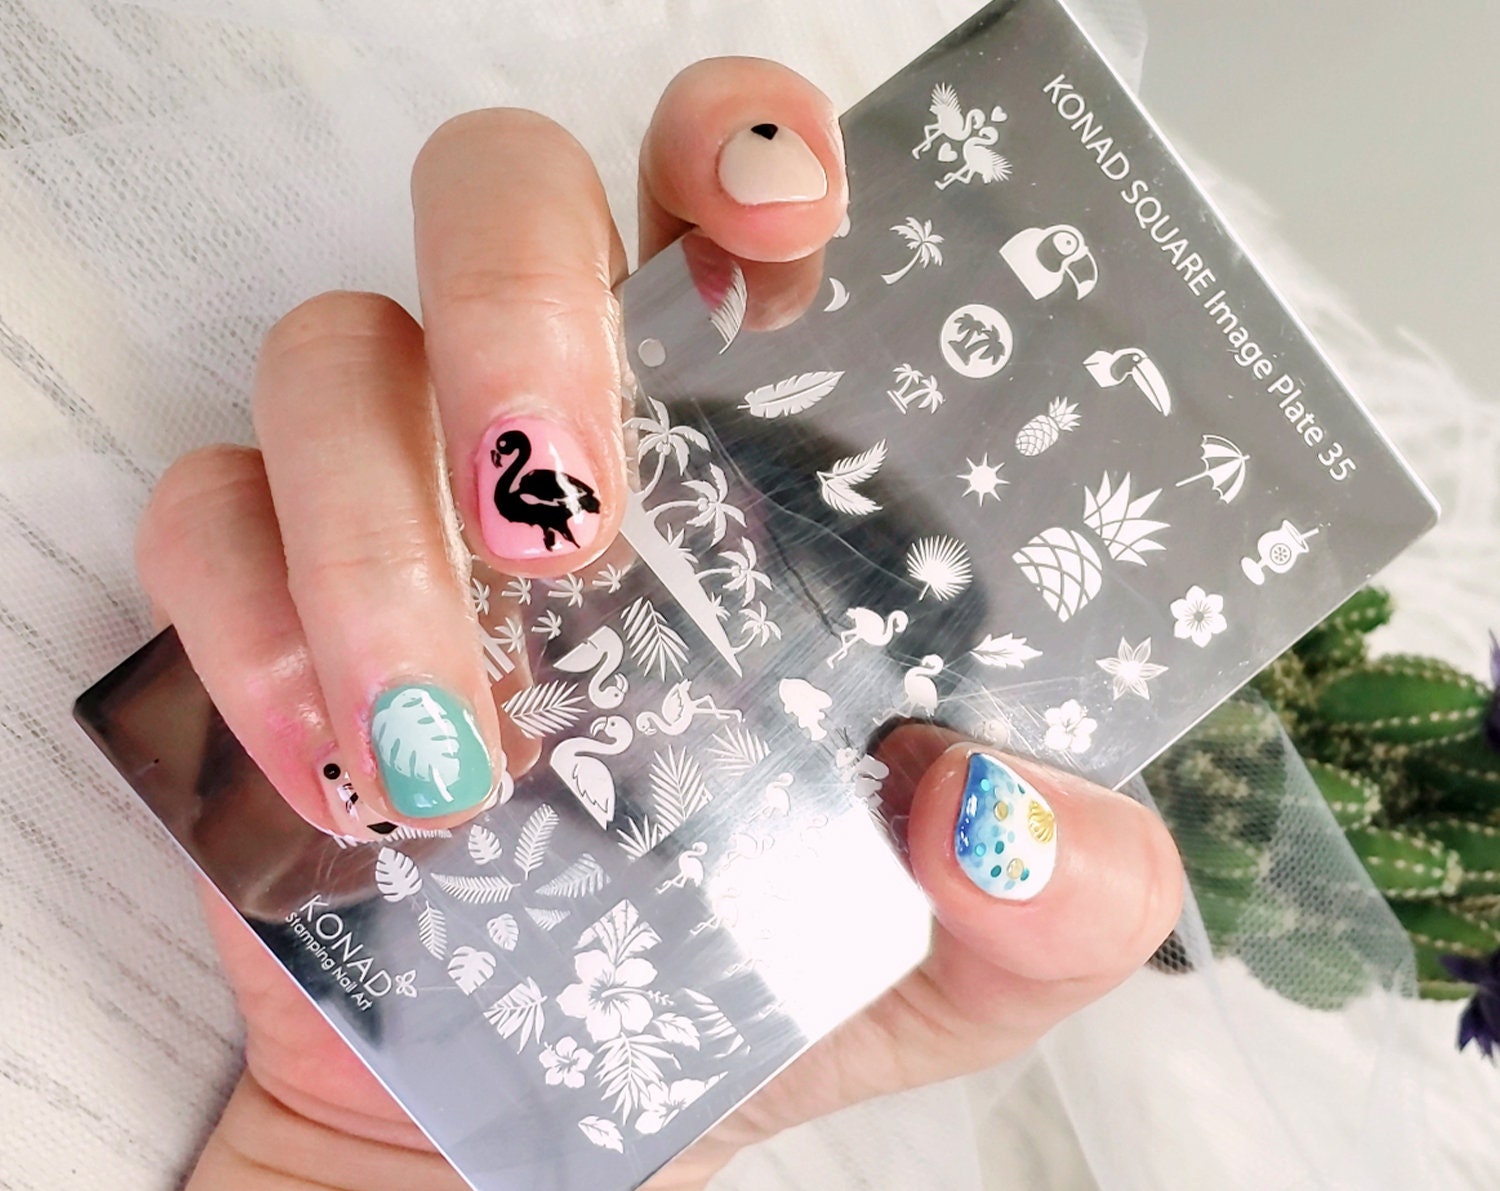 KONAD SQUARE IMAGE PLATE STAMPING NAIL ART | BLUSH PINK FLOWER PRINT DESIGN  | HOW TO TUTORIAL - YouTube